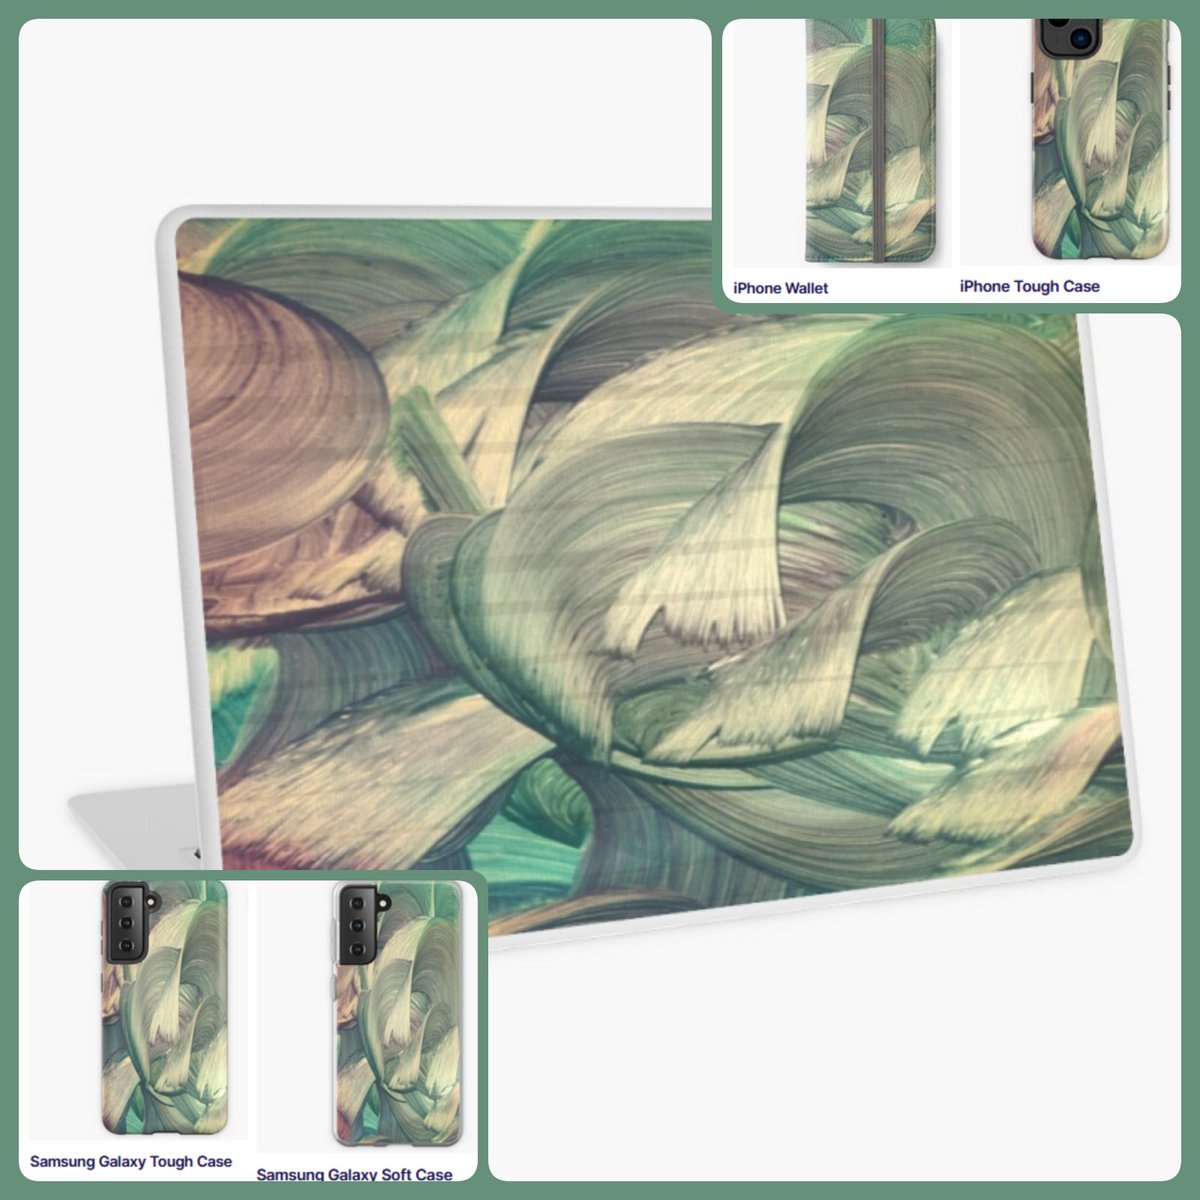 Elatos Laptop Skin ~Be Artful~ #accessories #office #art #artfalaxy #desk #galaxy #iPad #iphones #laptop #magnets #mouse #notebooks #phones #skins #pins #redbubble #stickers #wallets #trendy #modern #FindYourThing #pink #purple #green #white

redbubble.com/i/laptop-skin/…